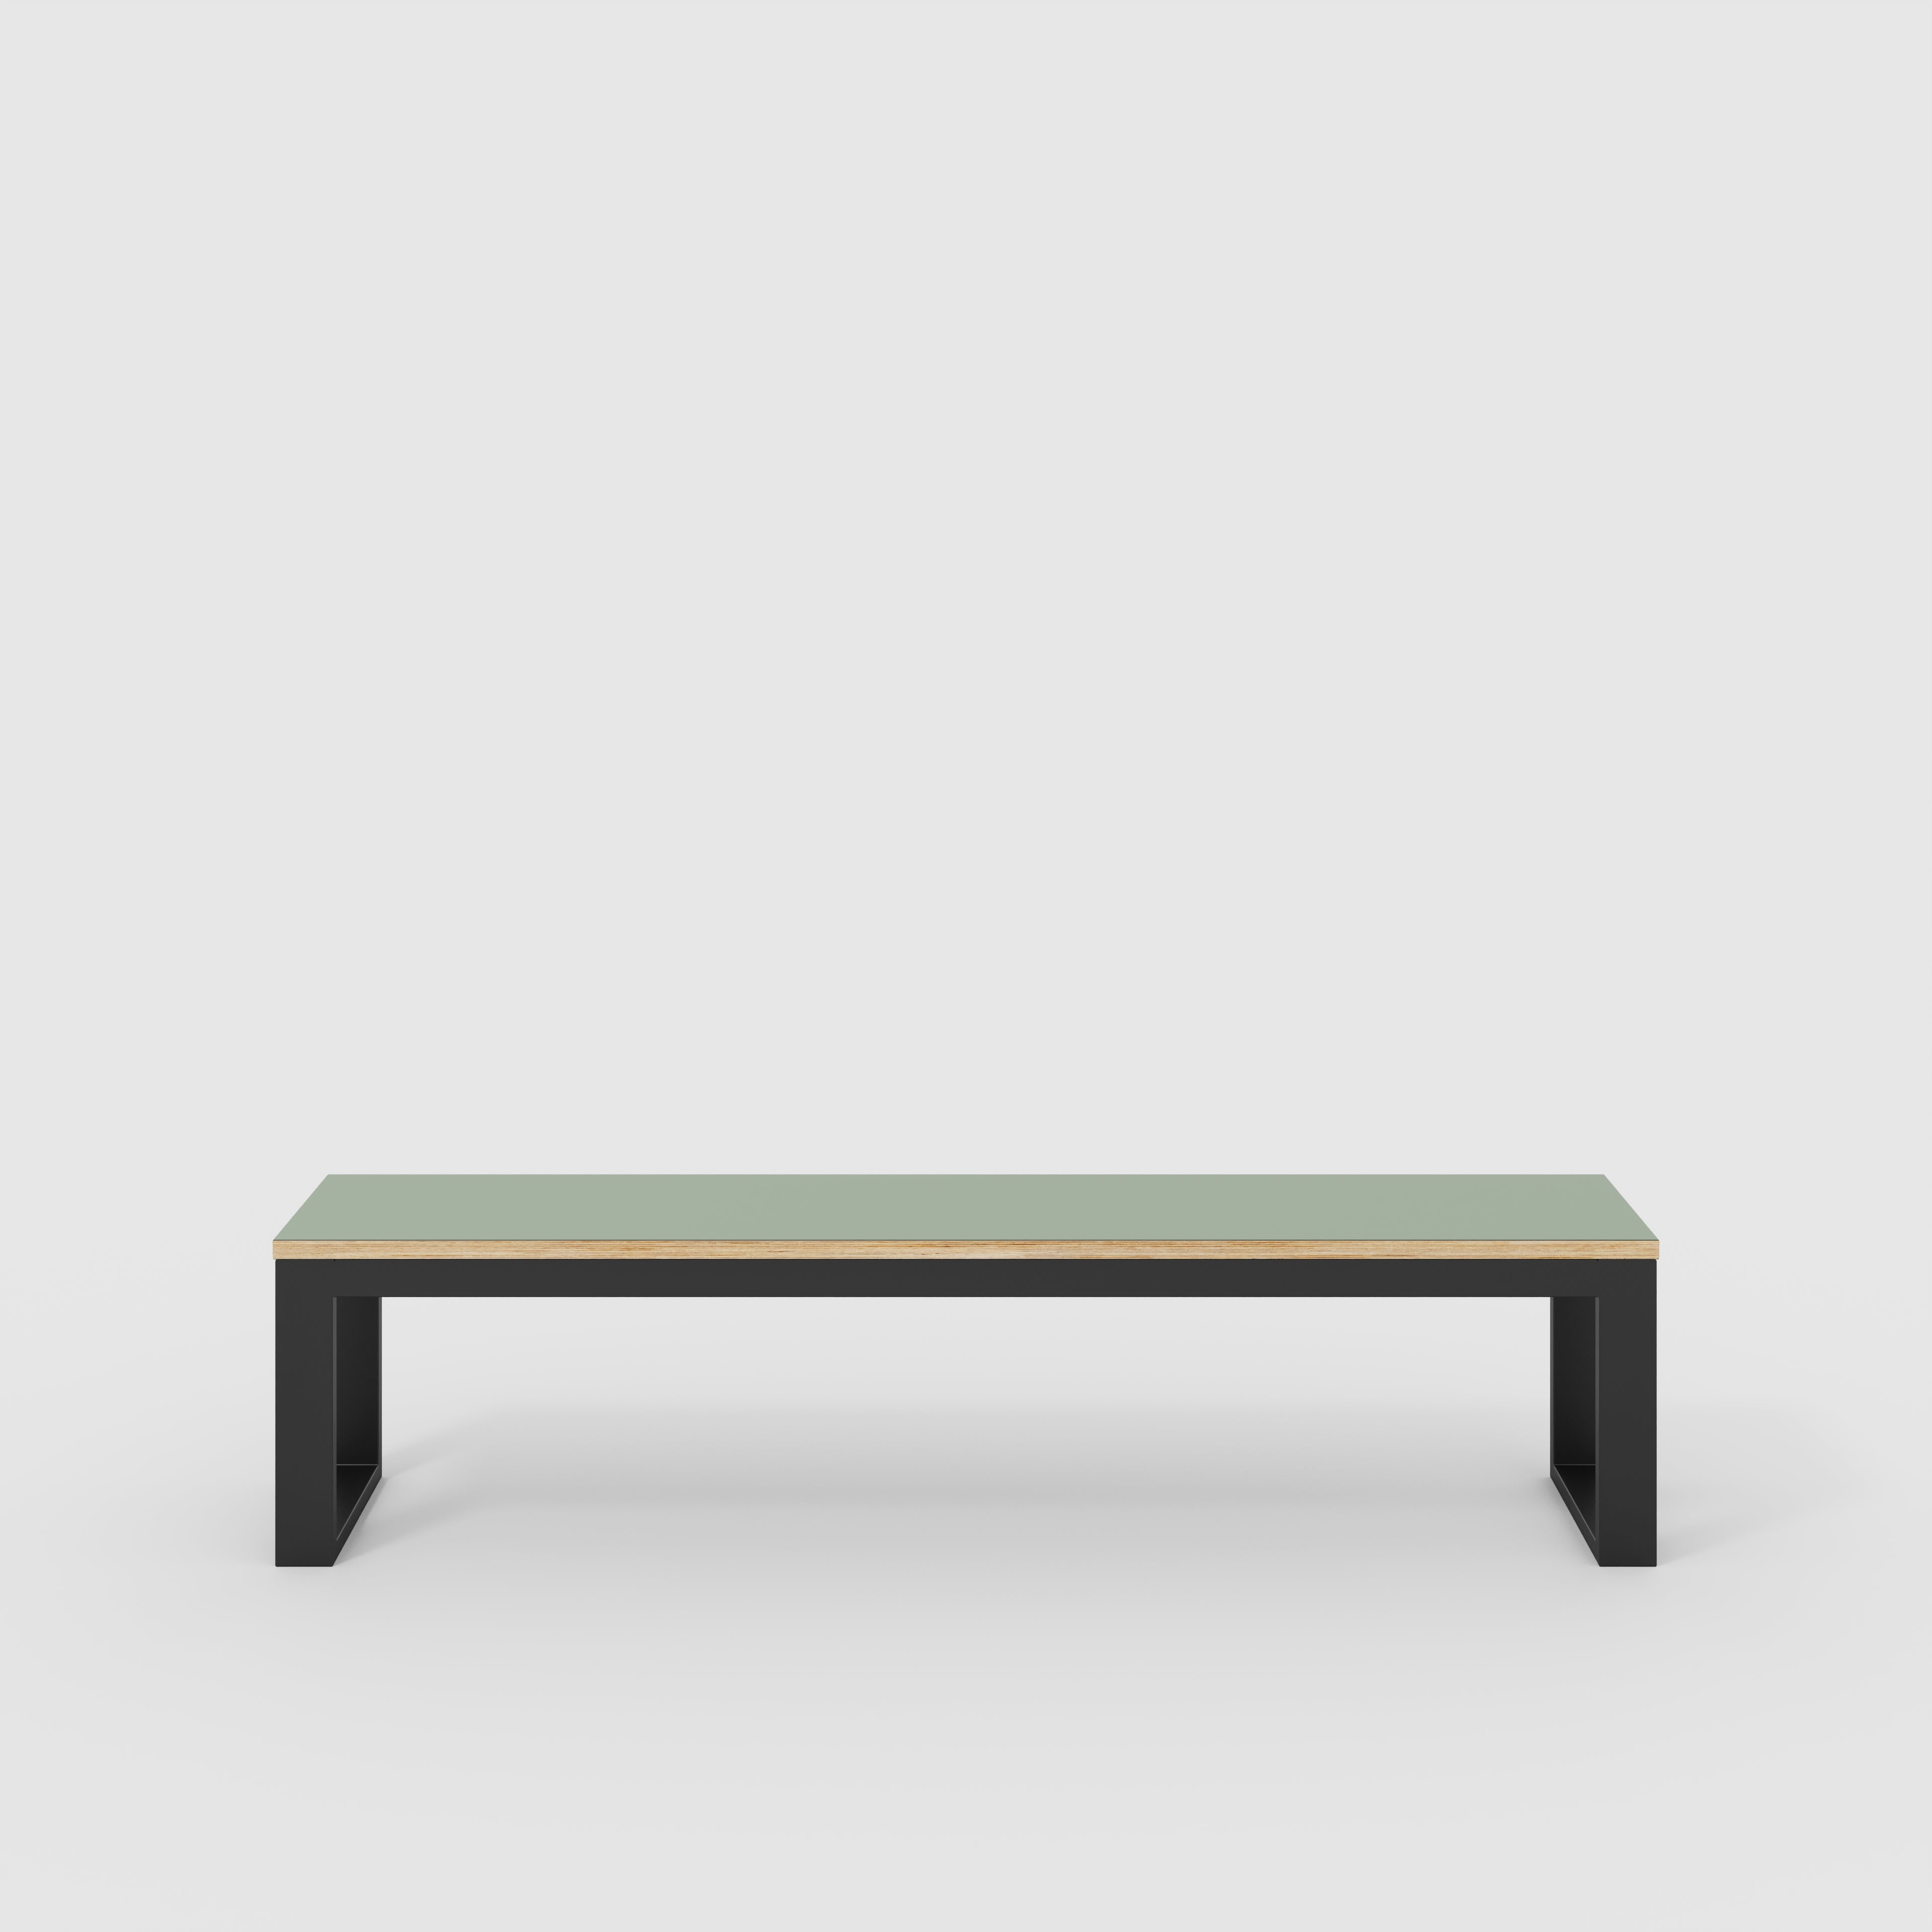 Bench Seat with Black Industrial Frame - Formica Green Slate - 1800(w) x 325(d)